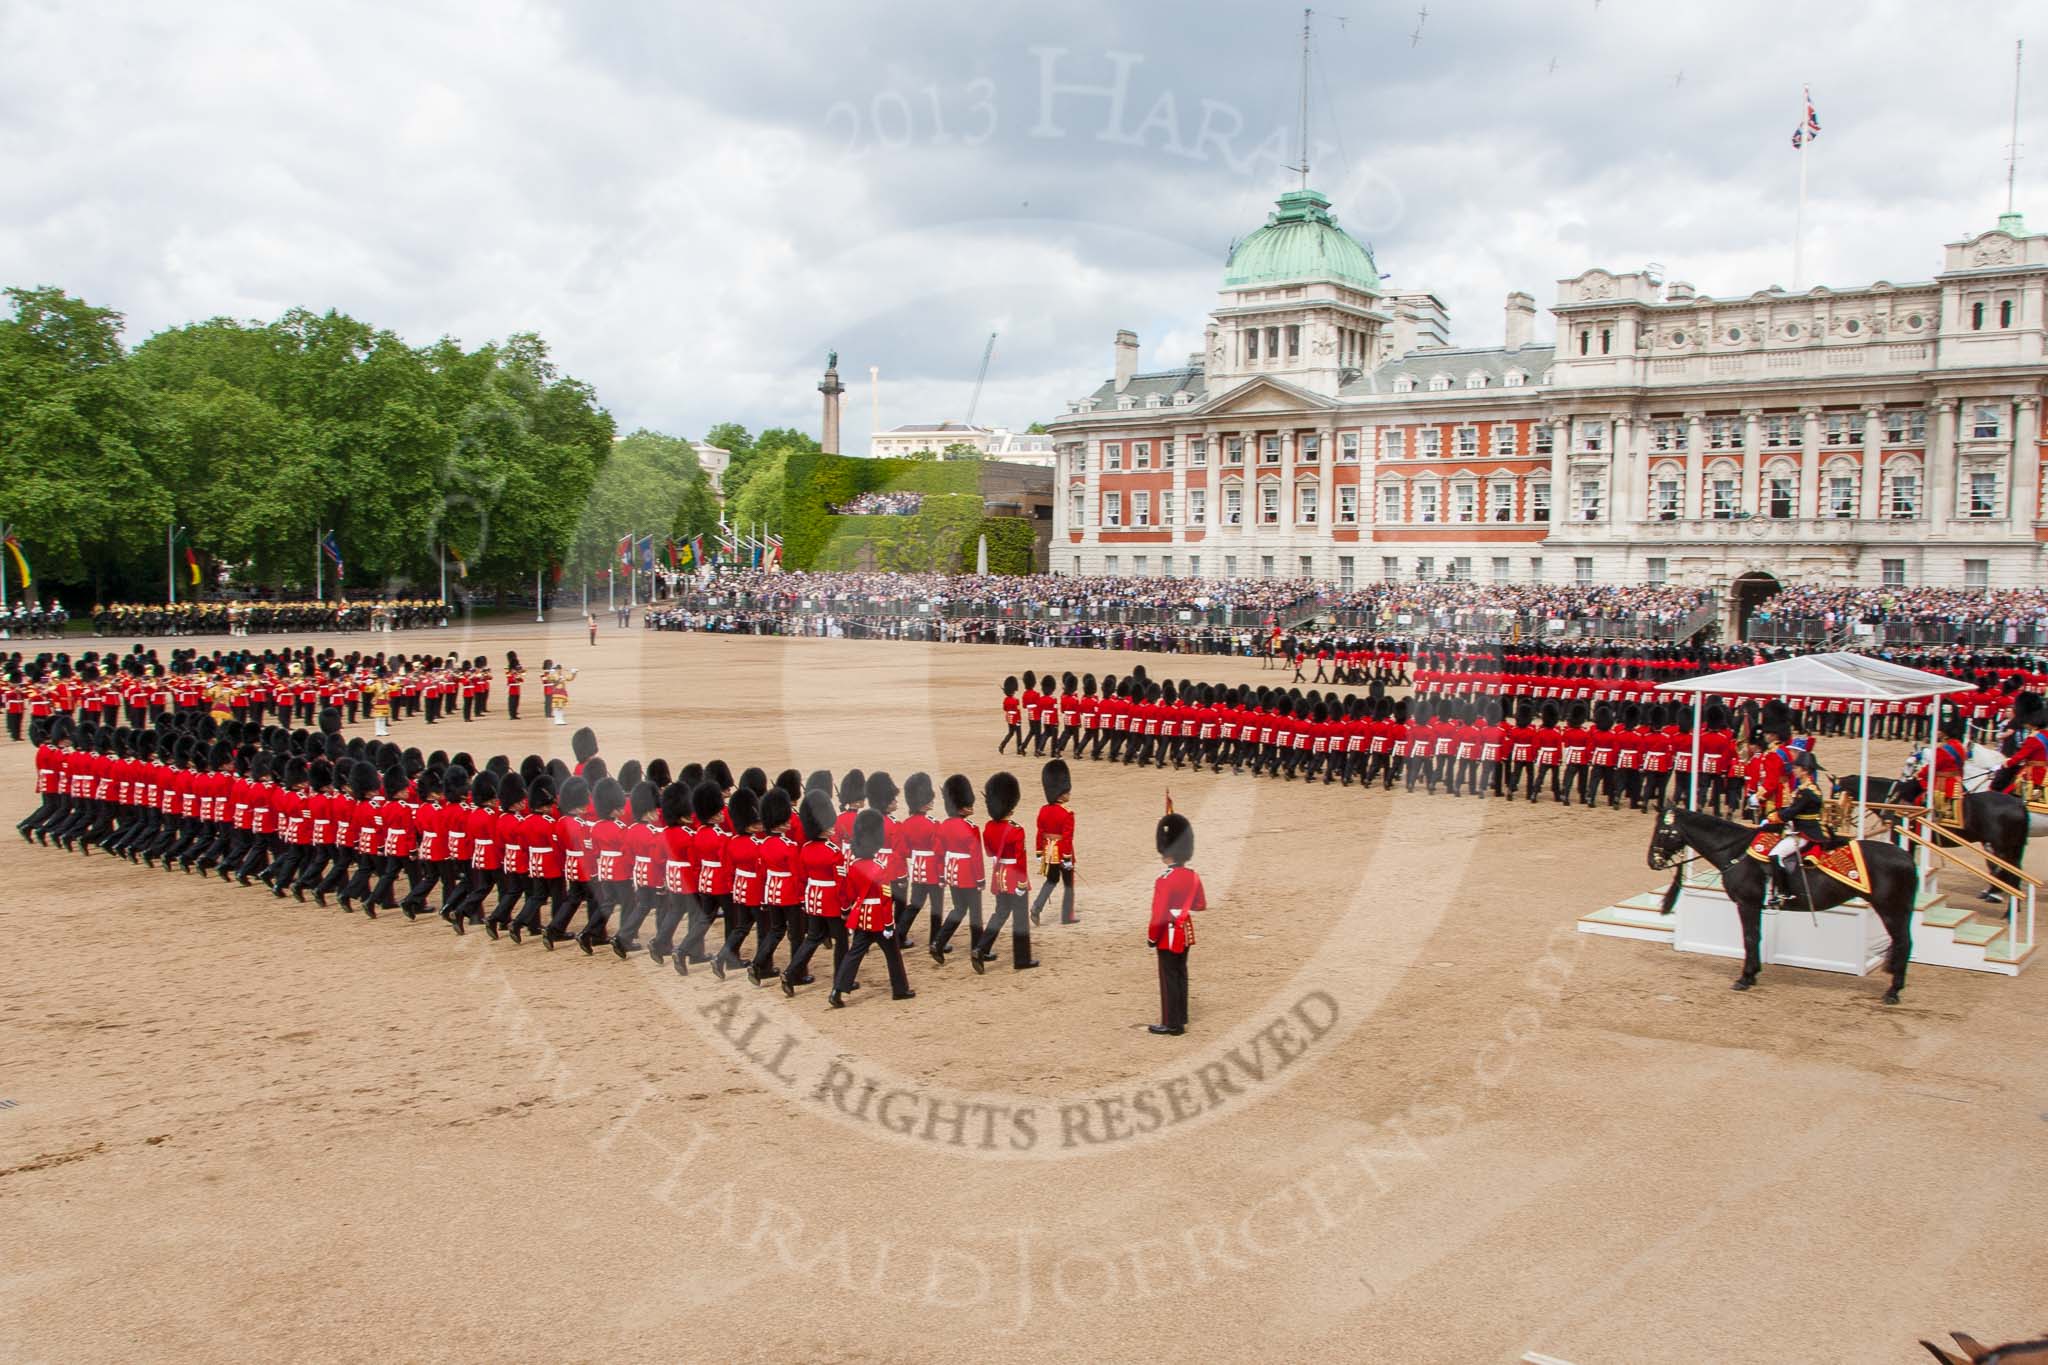 Trooping the Colour 2013: No. 1 to No. 5 Guard during the March Past. Image #554, 15 June 2013 11:38 Horse Guards Parade, London, UK